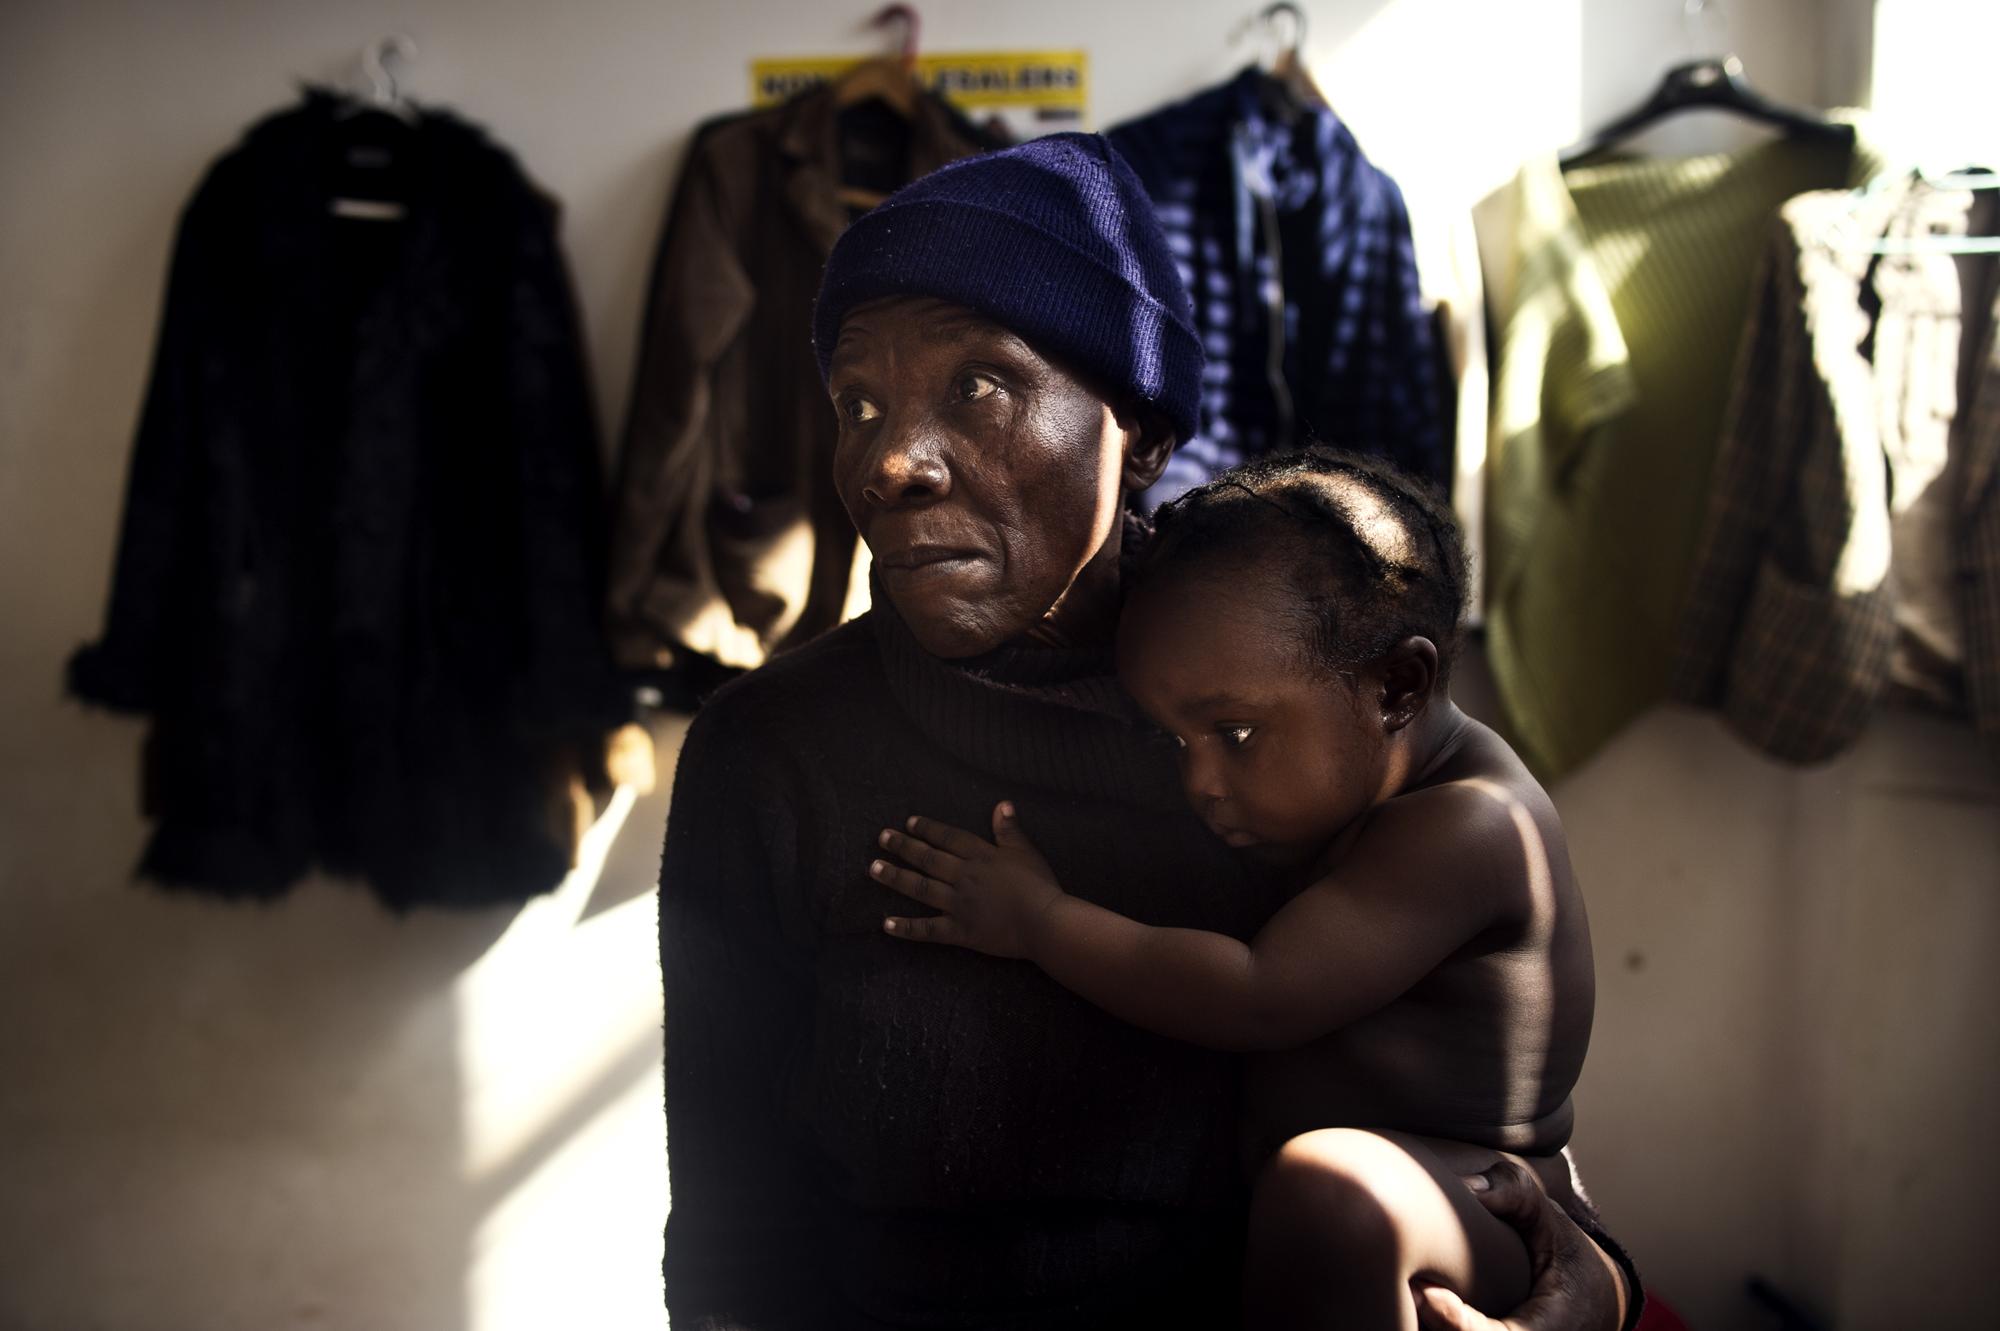 Children of the shadows - Johannesburg, South Africa.June 2012Ruth Manyike, 53...